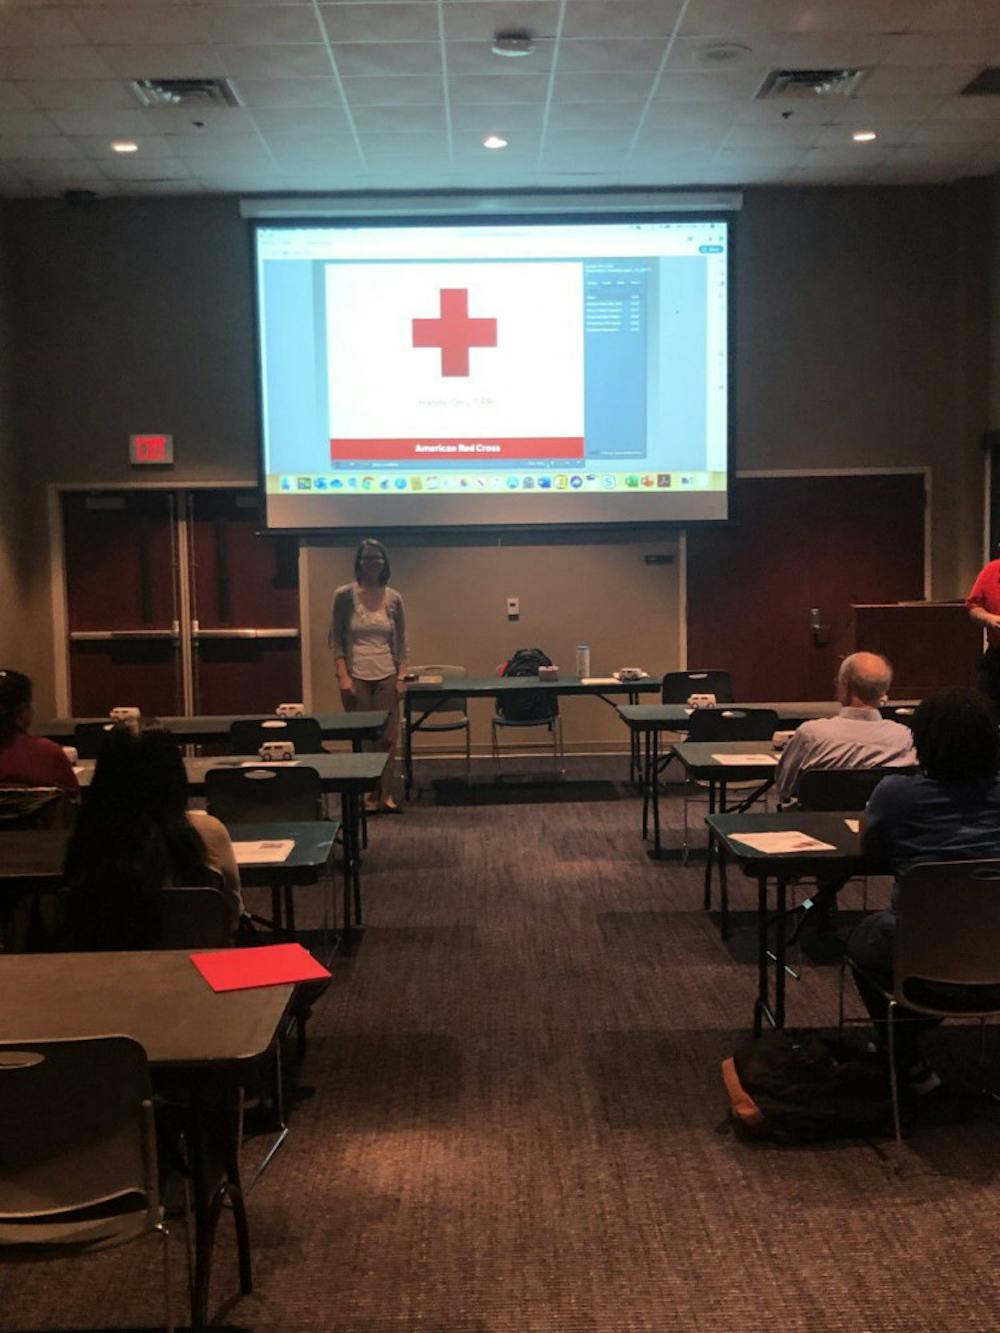 <p class="p1"><span class="s1">University of Memphis students and faculty listen to a lecture on CPR. This is part of a week long lecture series focused on safety.</span></p>